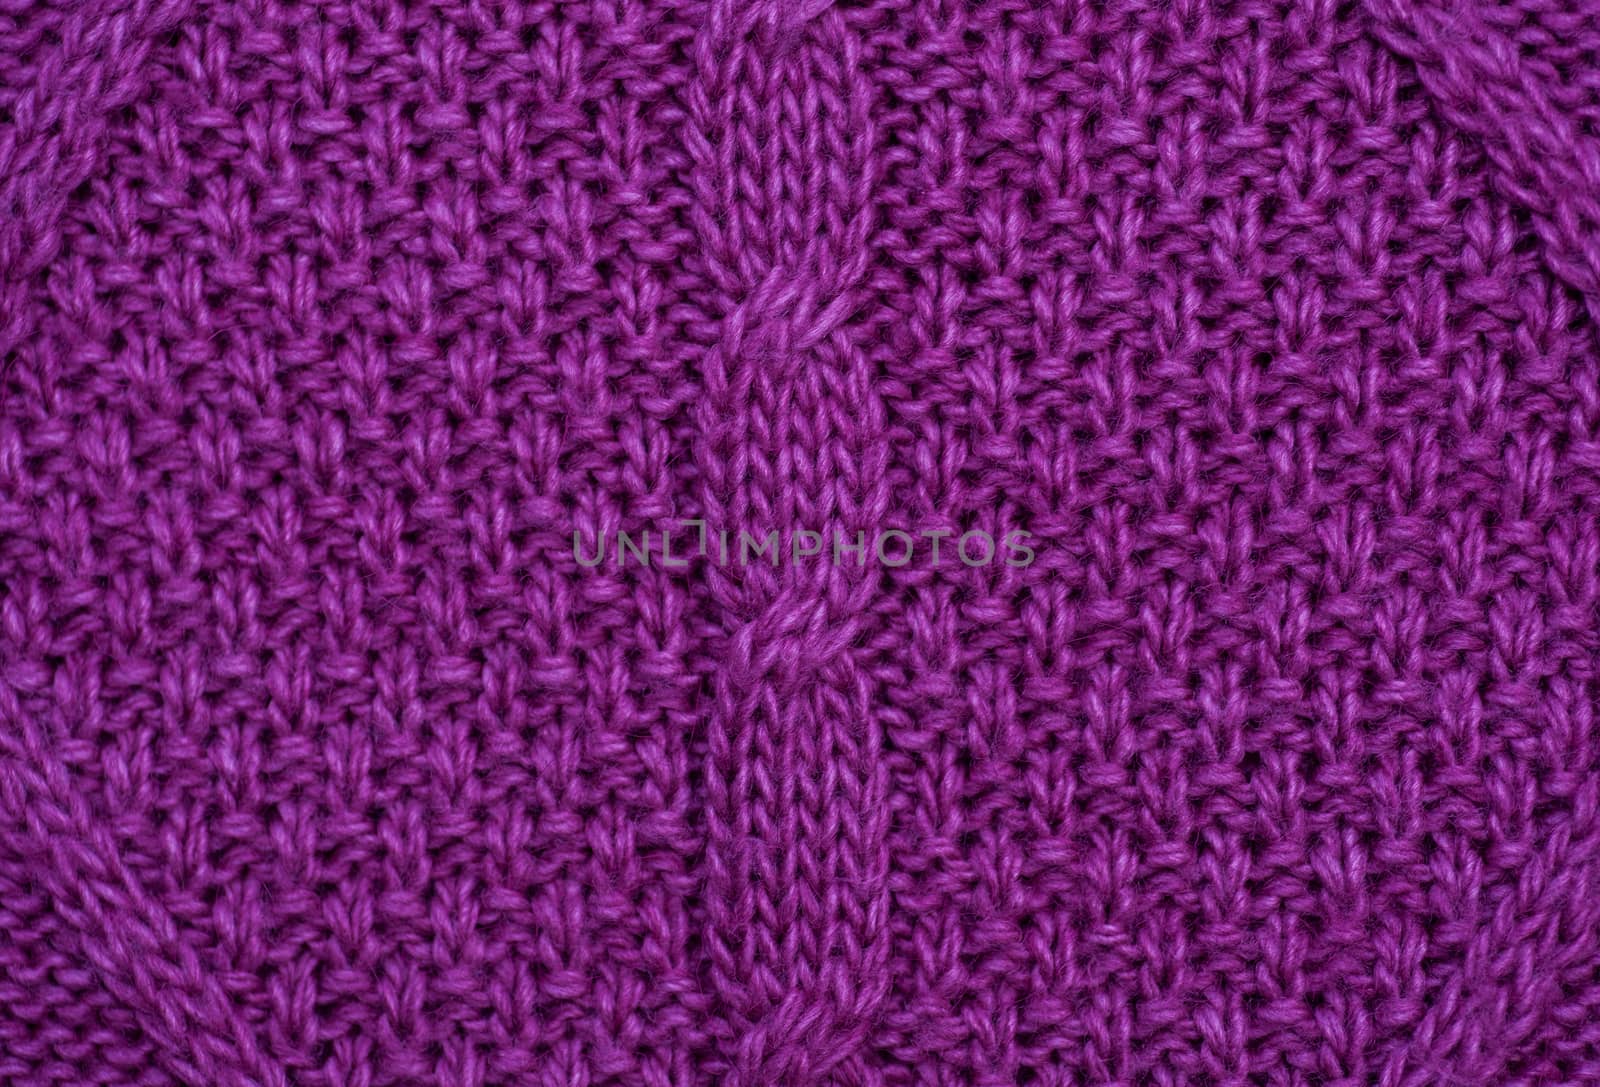 texture purple knitted fabric for the background by timonko